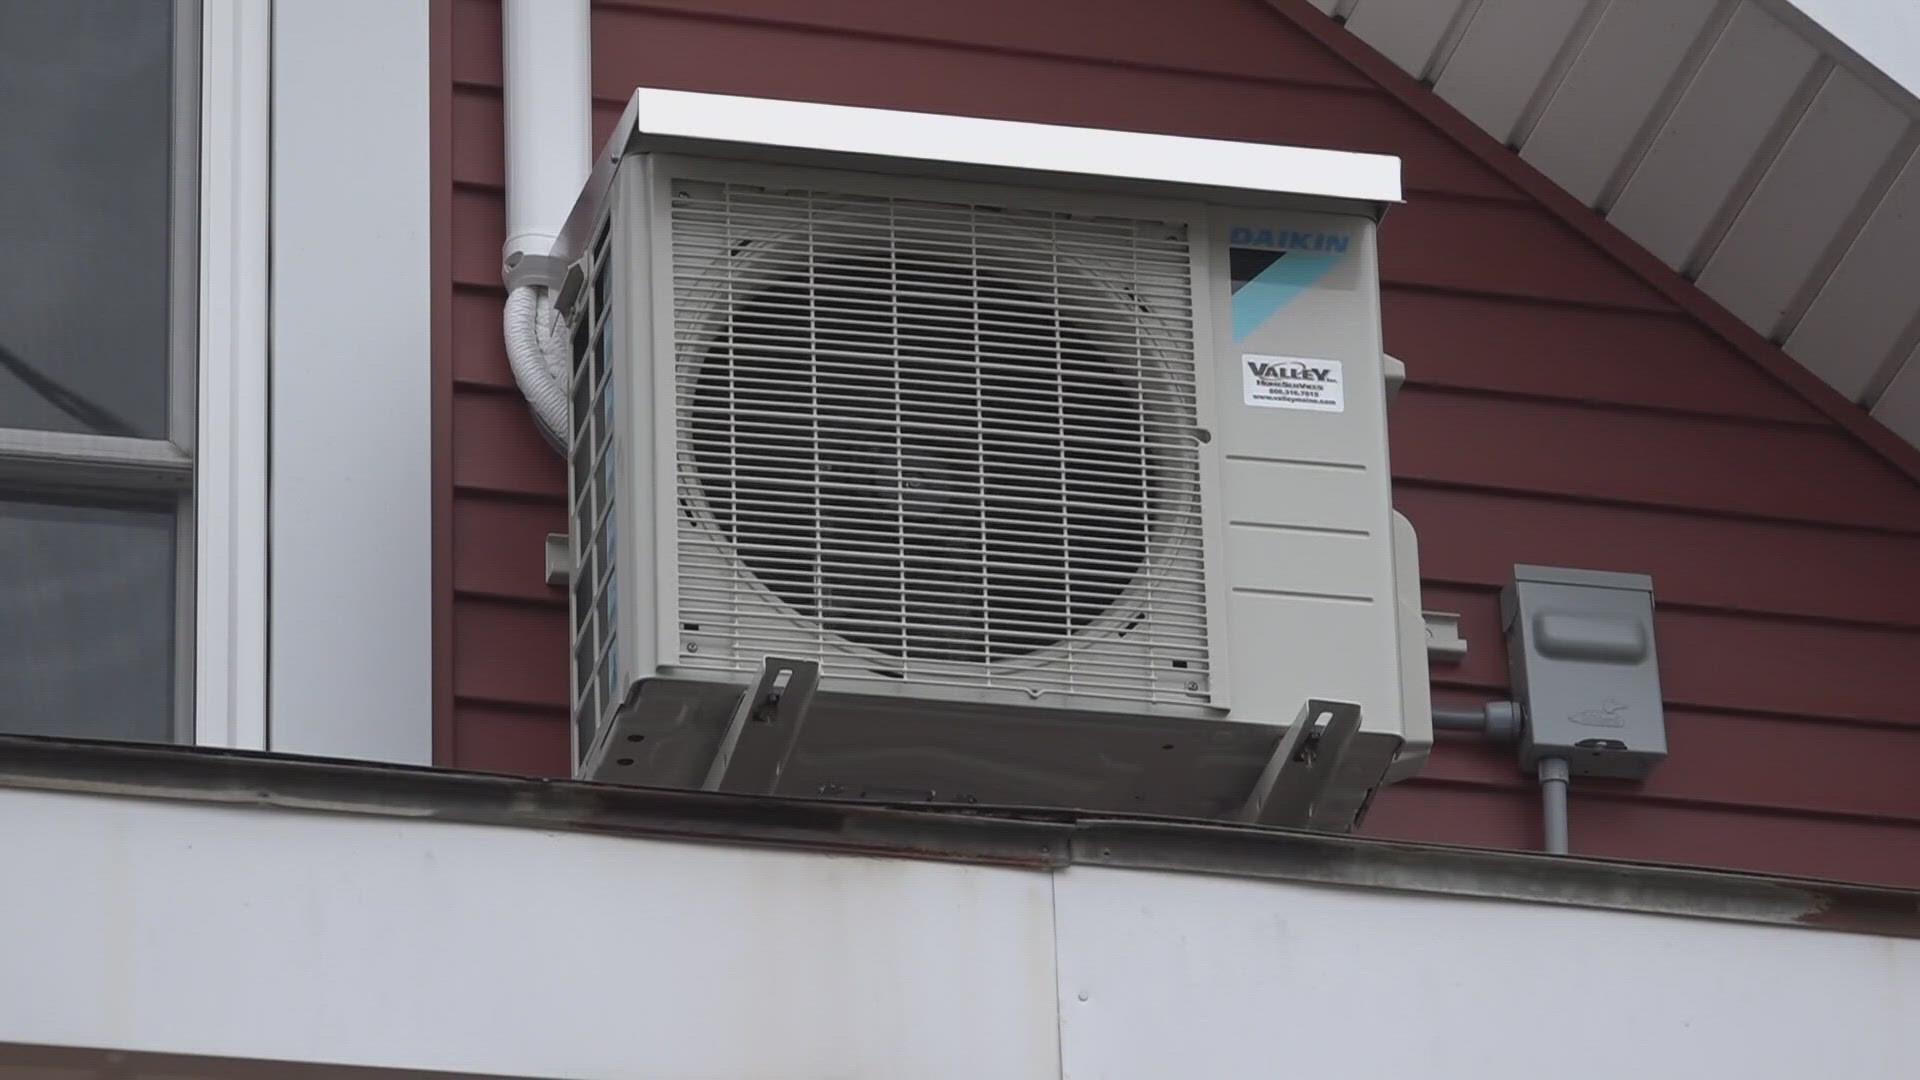 The governor set a lofty new goal for heat pump installations after the state hit its first goal two years early. But are there enough qualified workers to meet it?